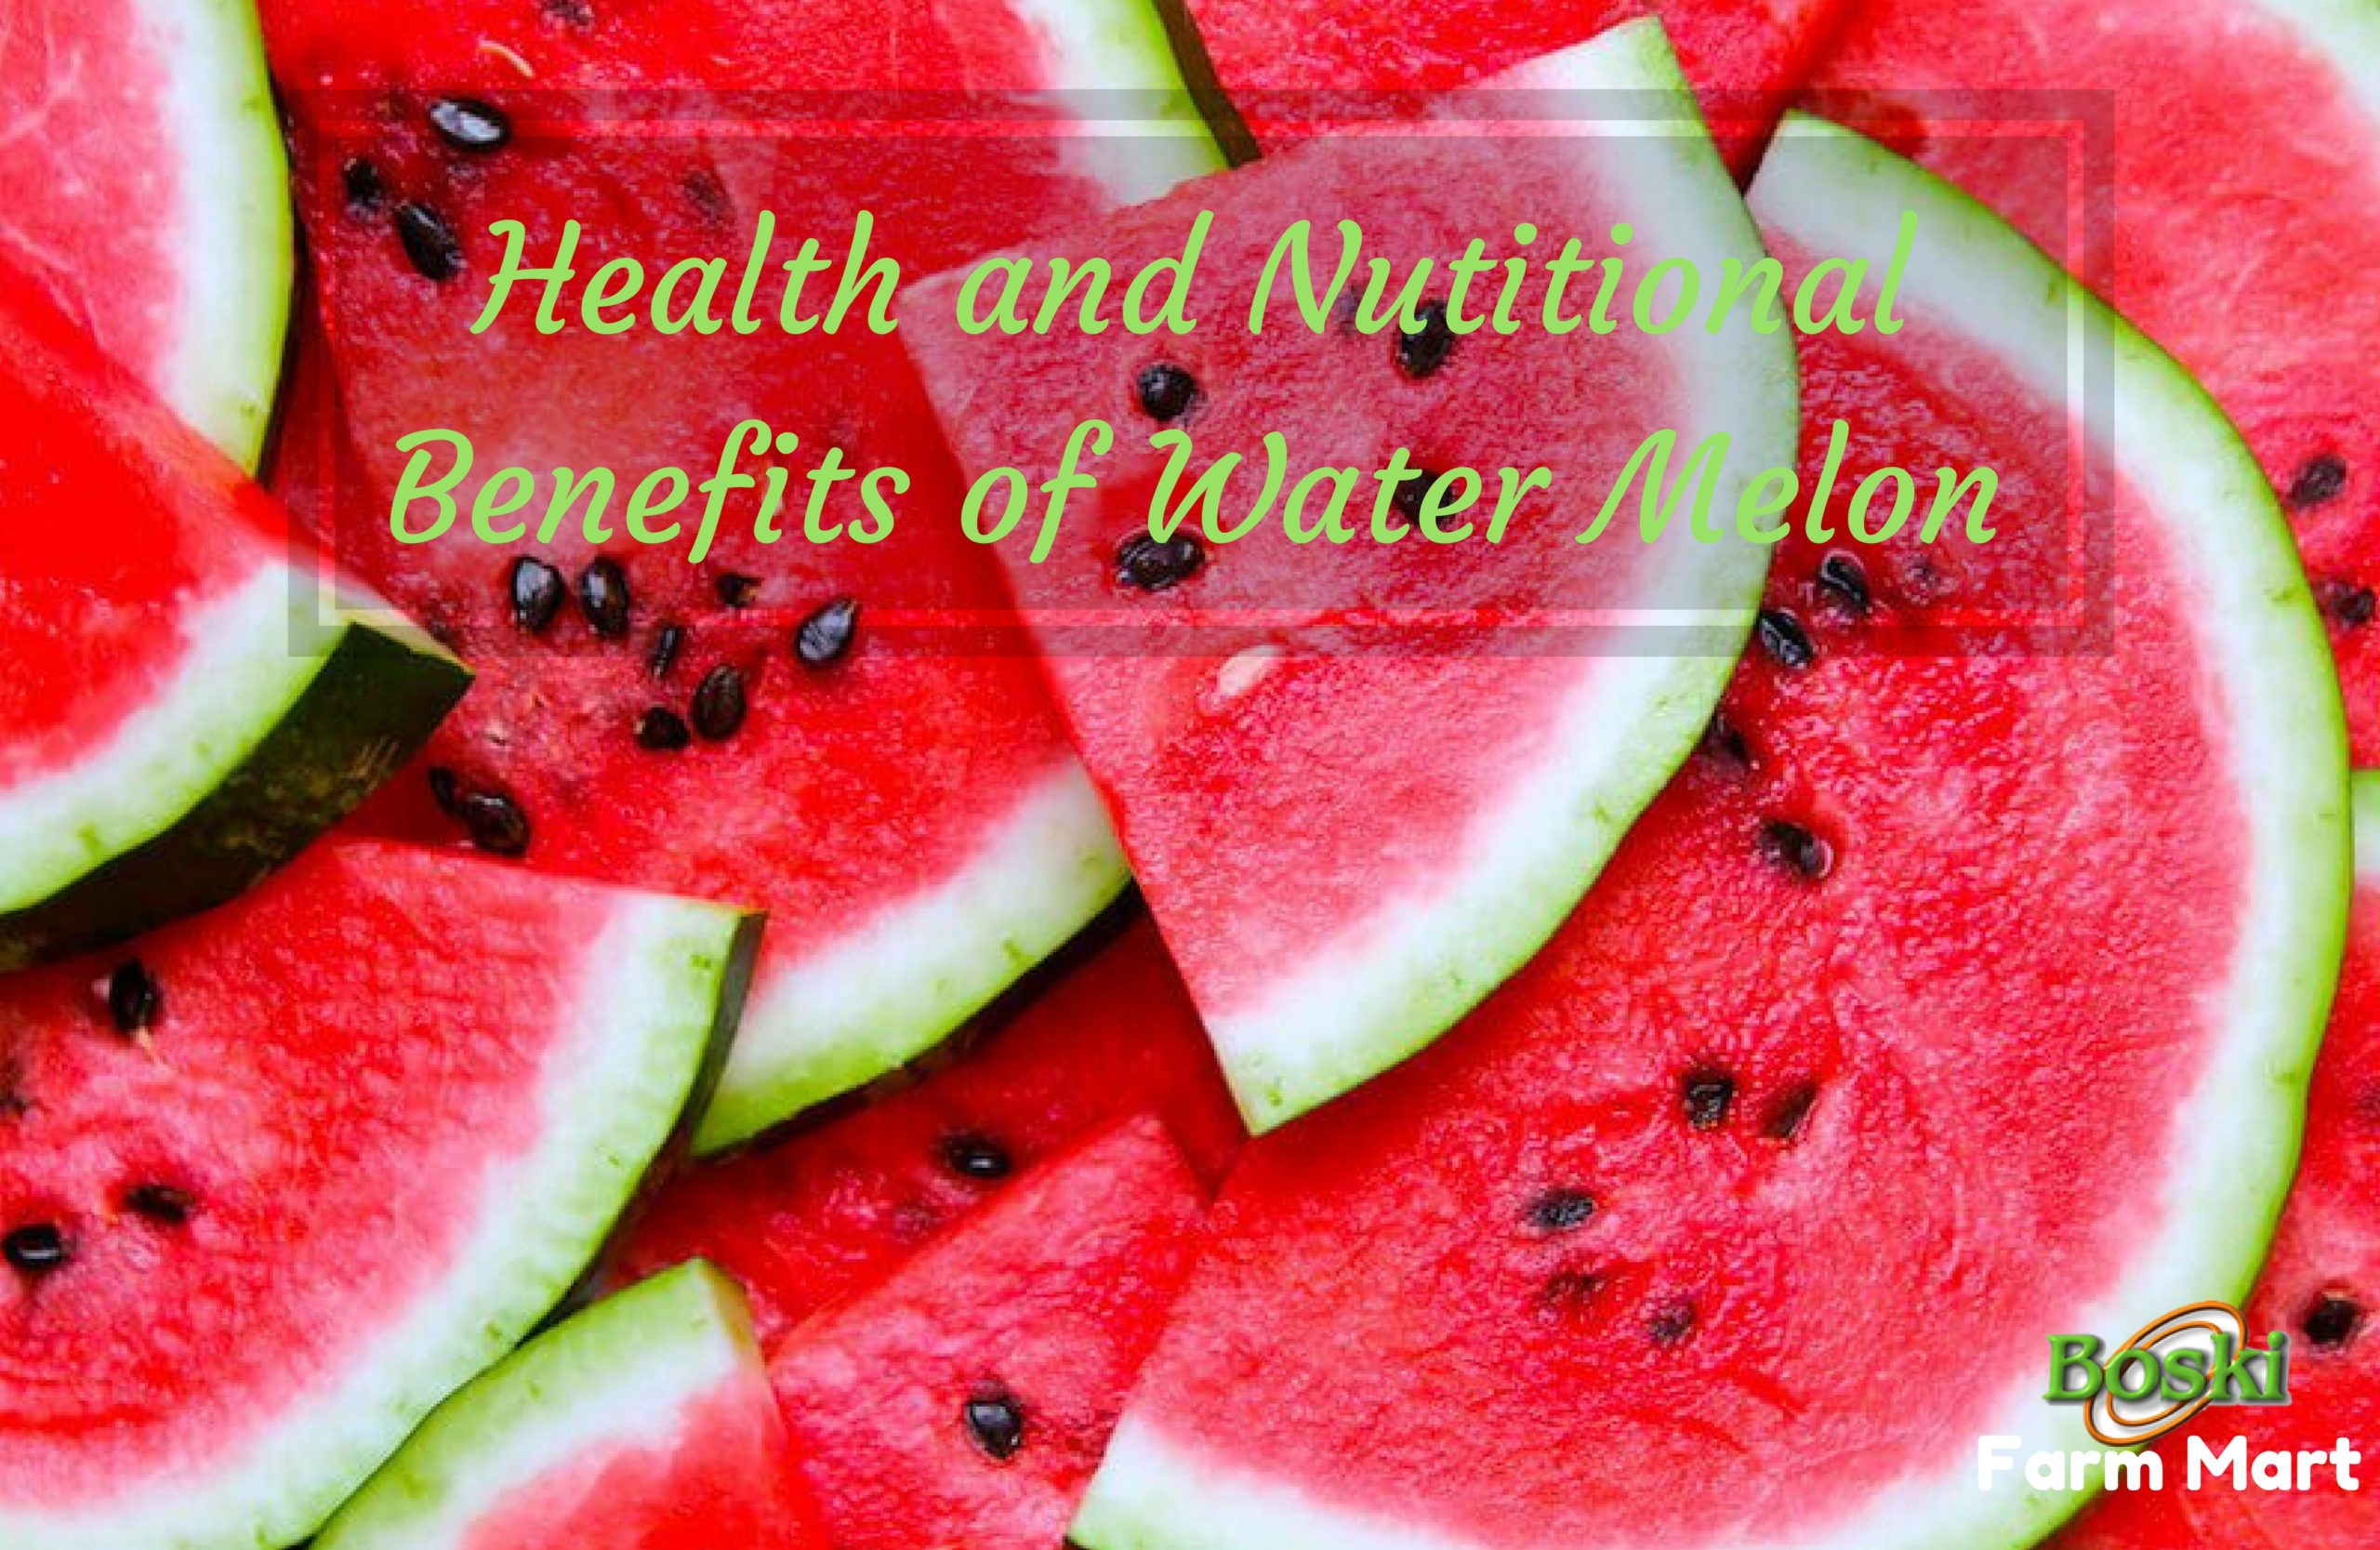 Nutritional benefits of watermelon